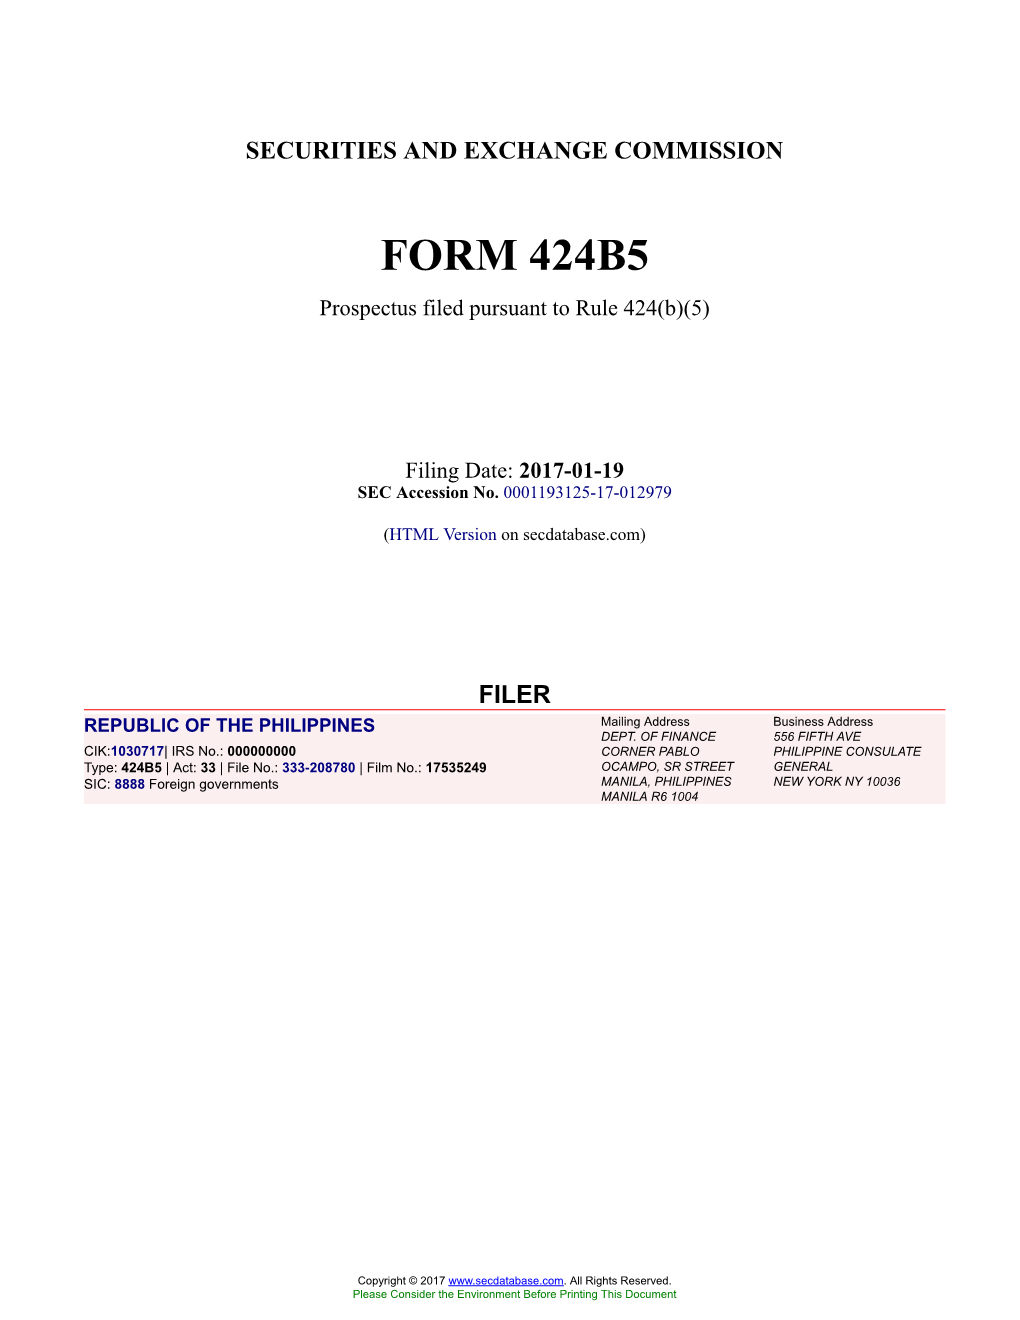 REPUBLIC of the PHILIPPINES Form 424B5 Filed 2017-01-19